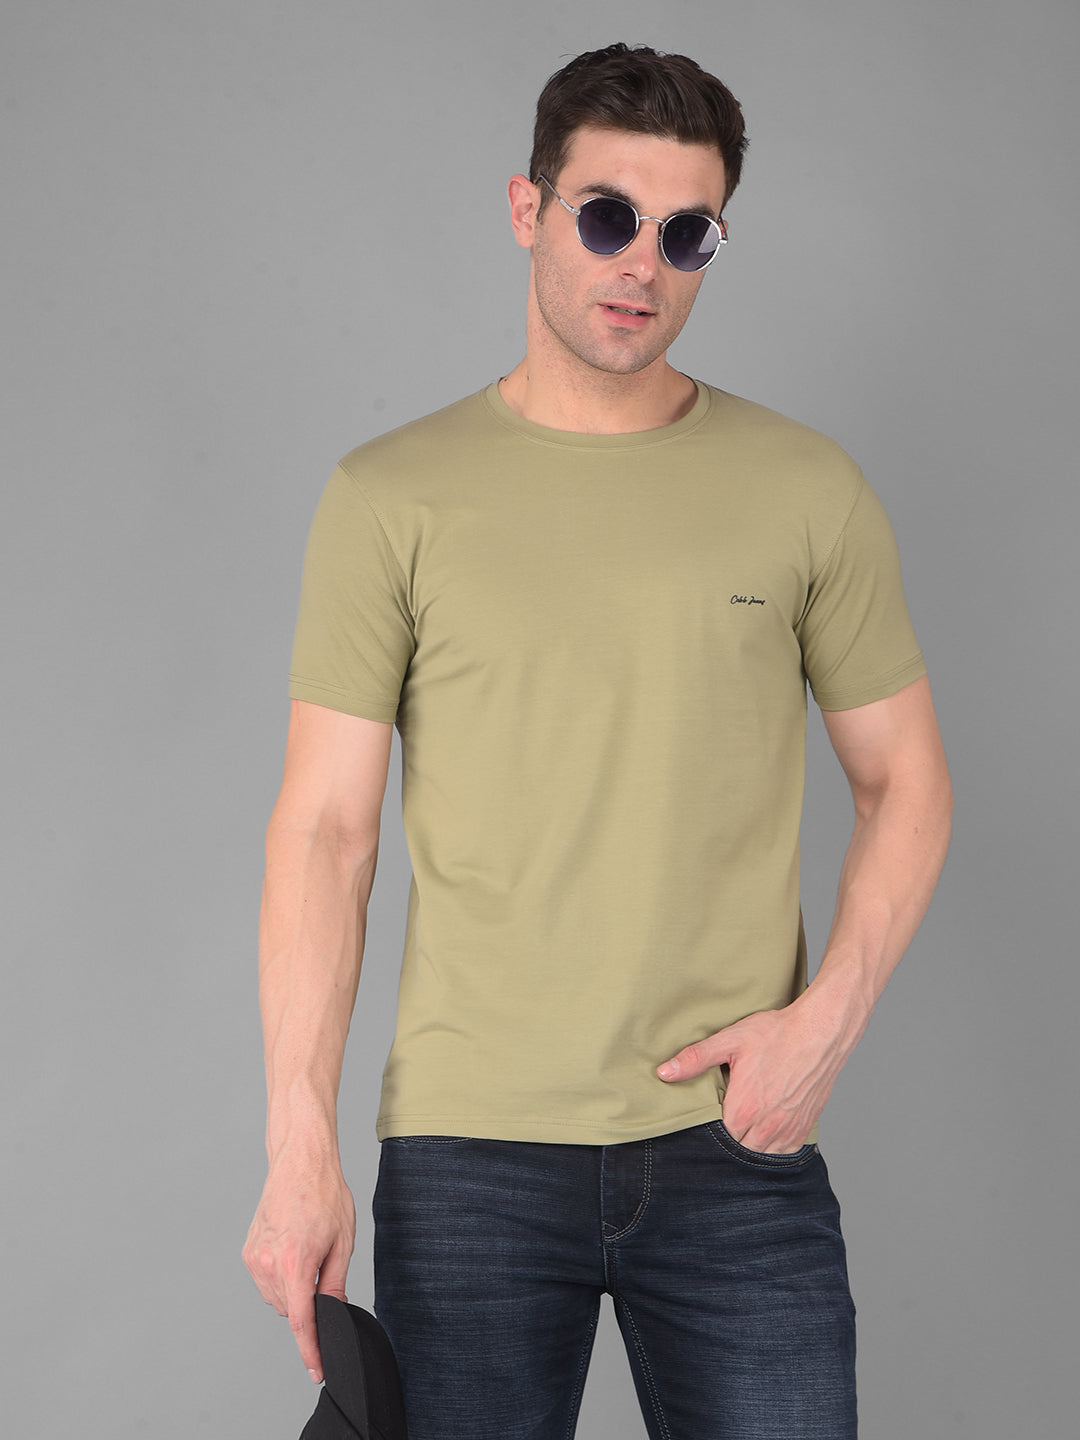 COBB SOLID OLIVE GREEN ROUND NECK T-SHIRT